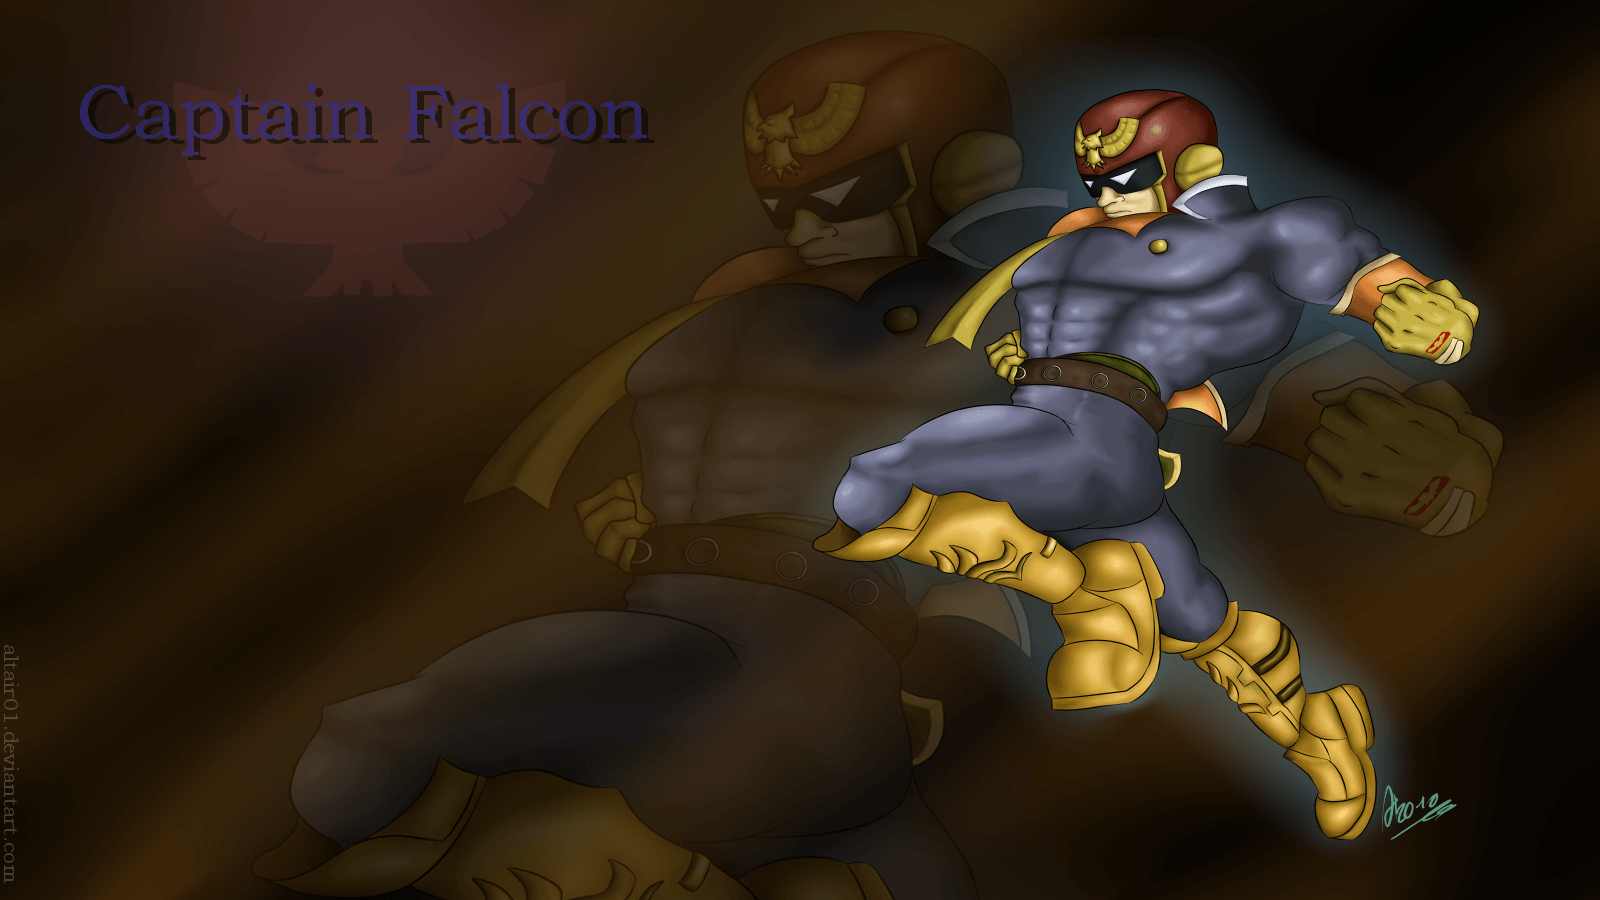 image For > Captain Falcon Knee